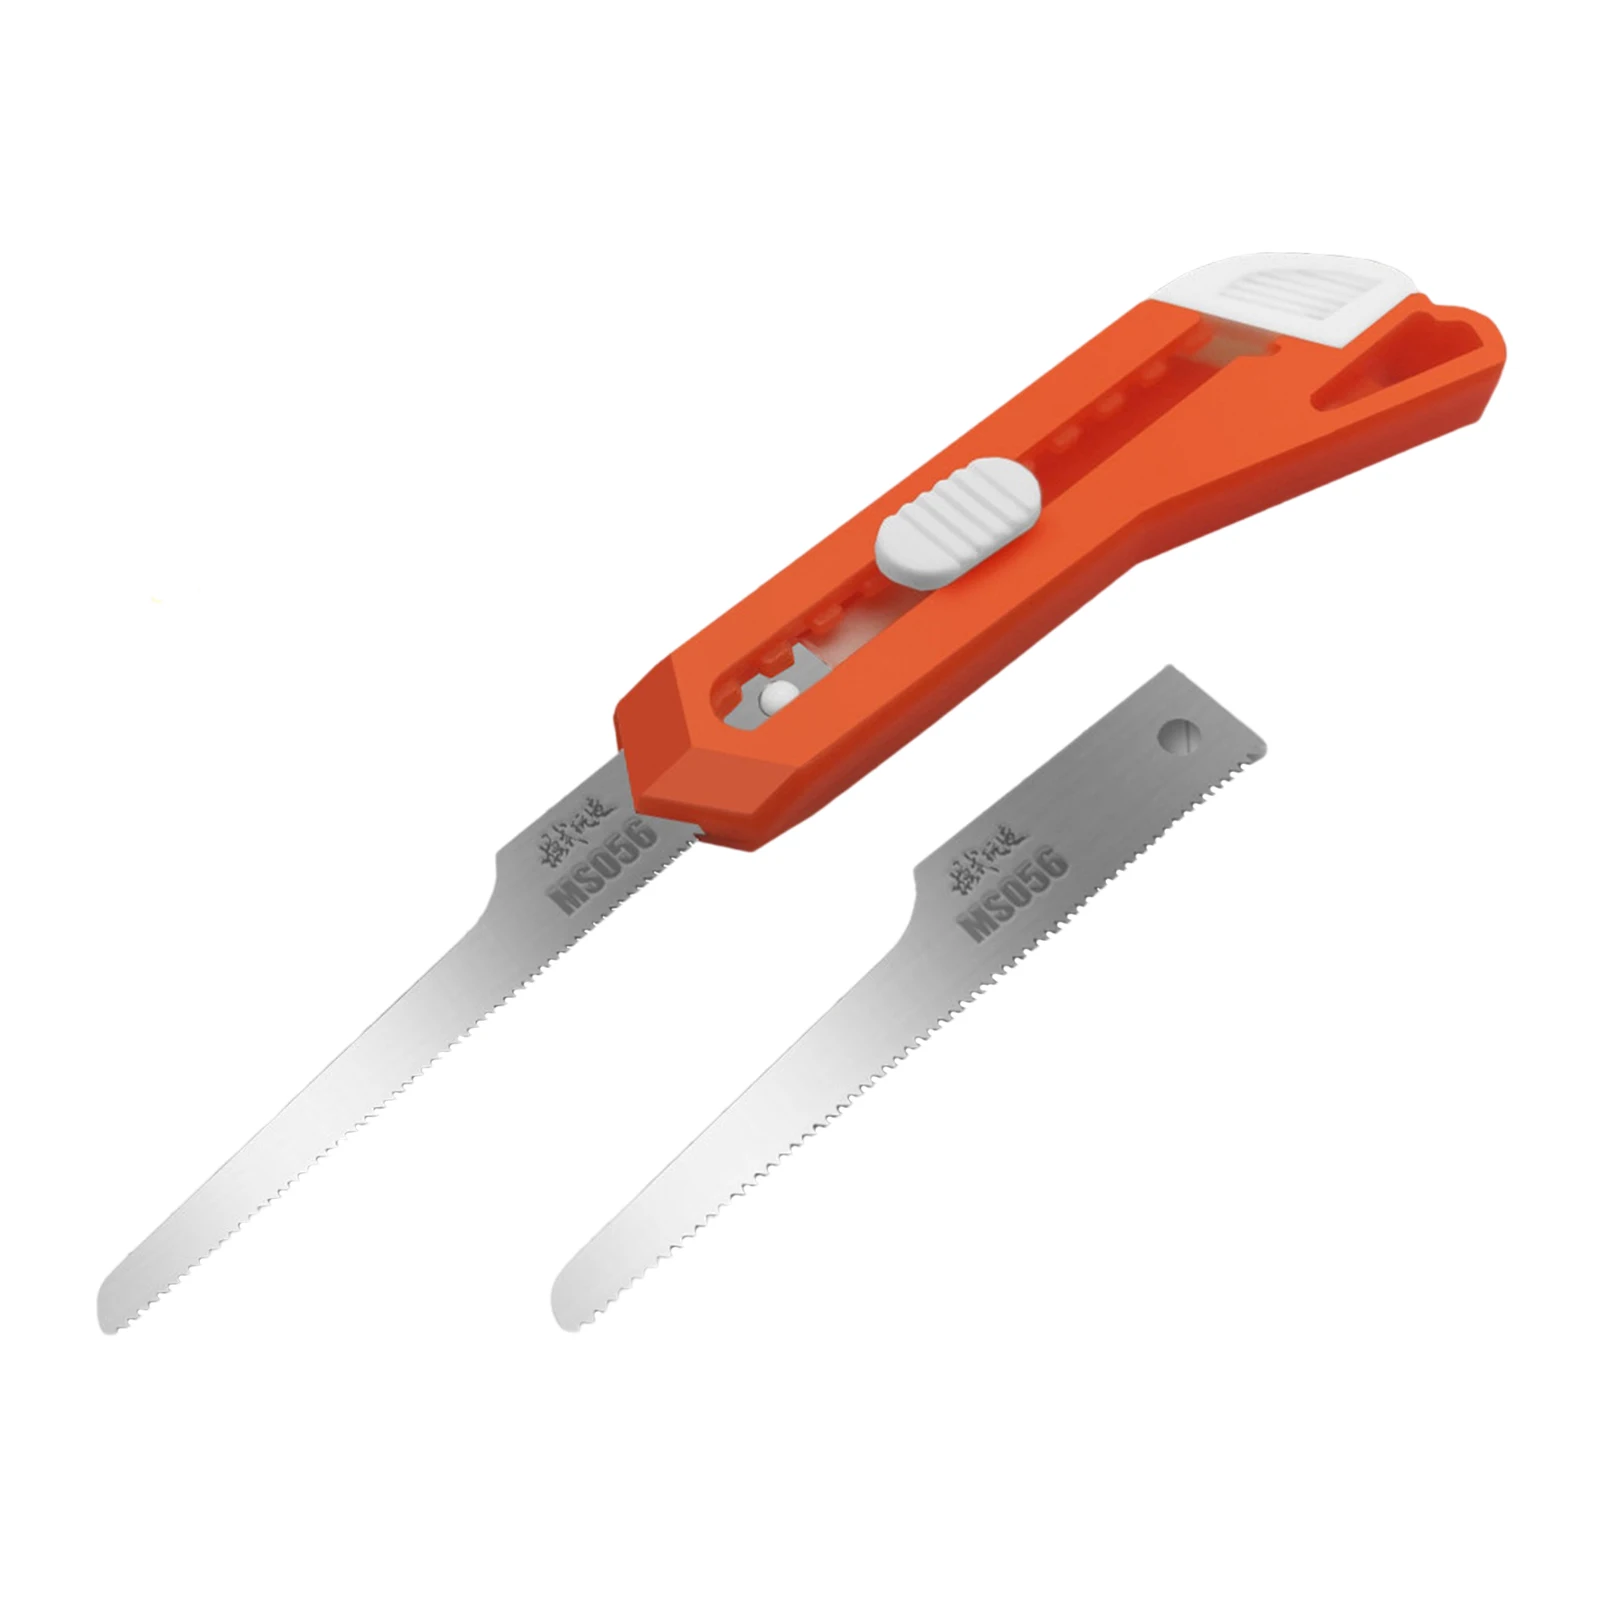 Handy Multifunction Model Mini Hand Saw Knife Blade Cutter 2in1 Craft Tool